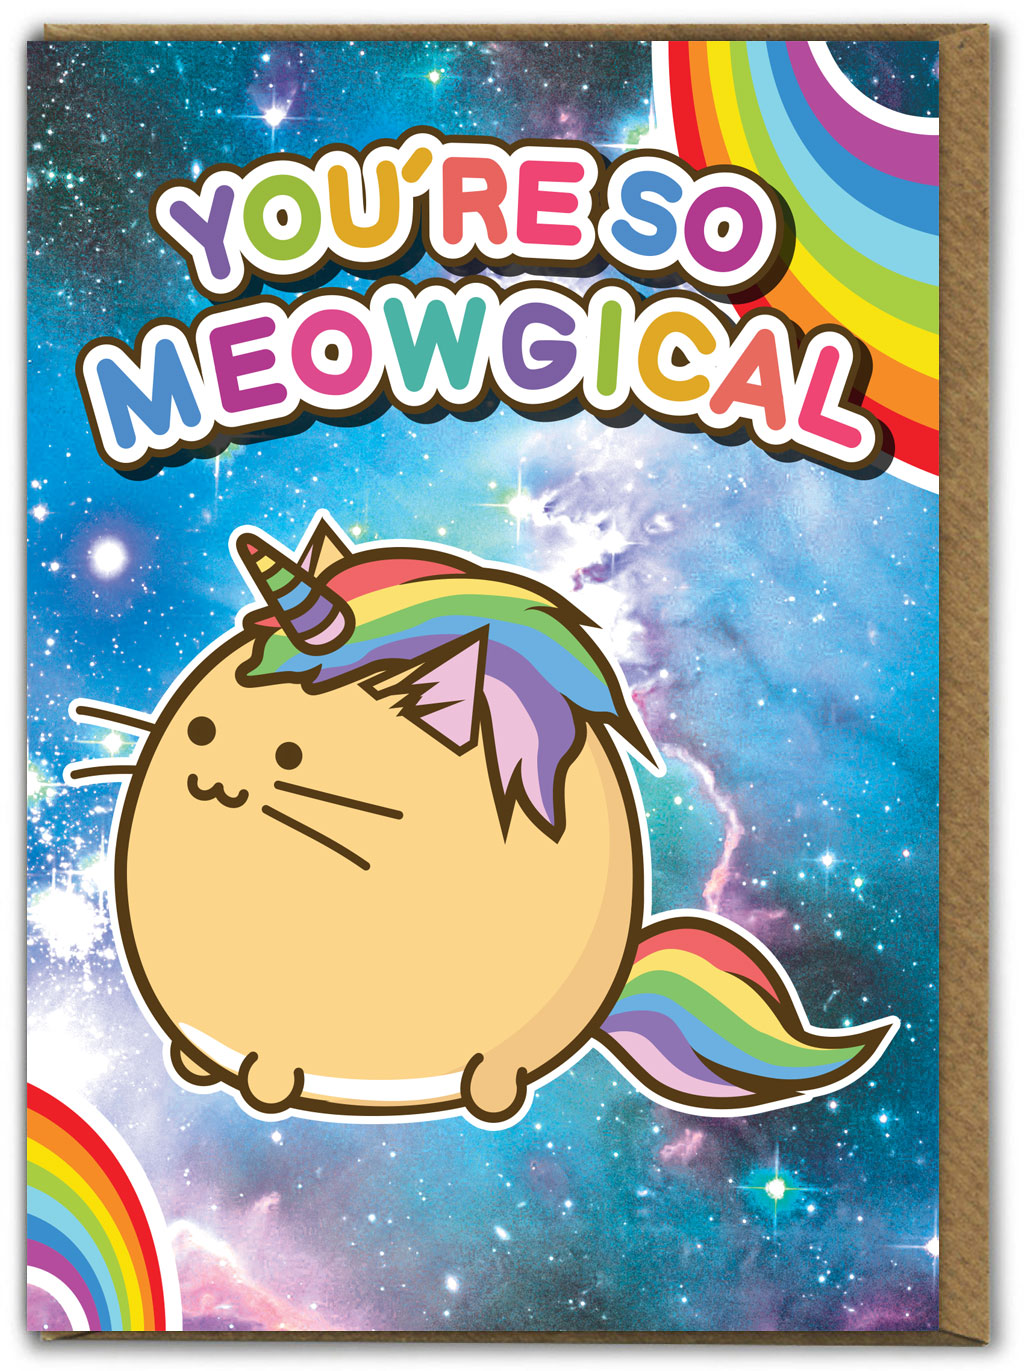 A greetings card with a colourful space background with two rainbows in two corners. There is an illustration of a round, beige cat dressed as a rainbow unicorn. The words on the card say &#39;you&#39;re so meowgical&#39;.